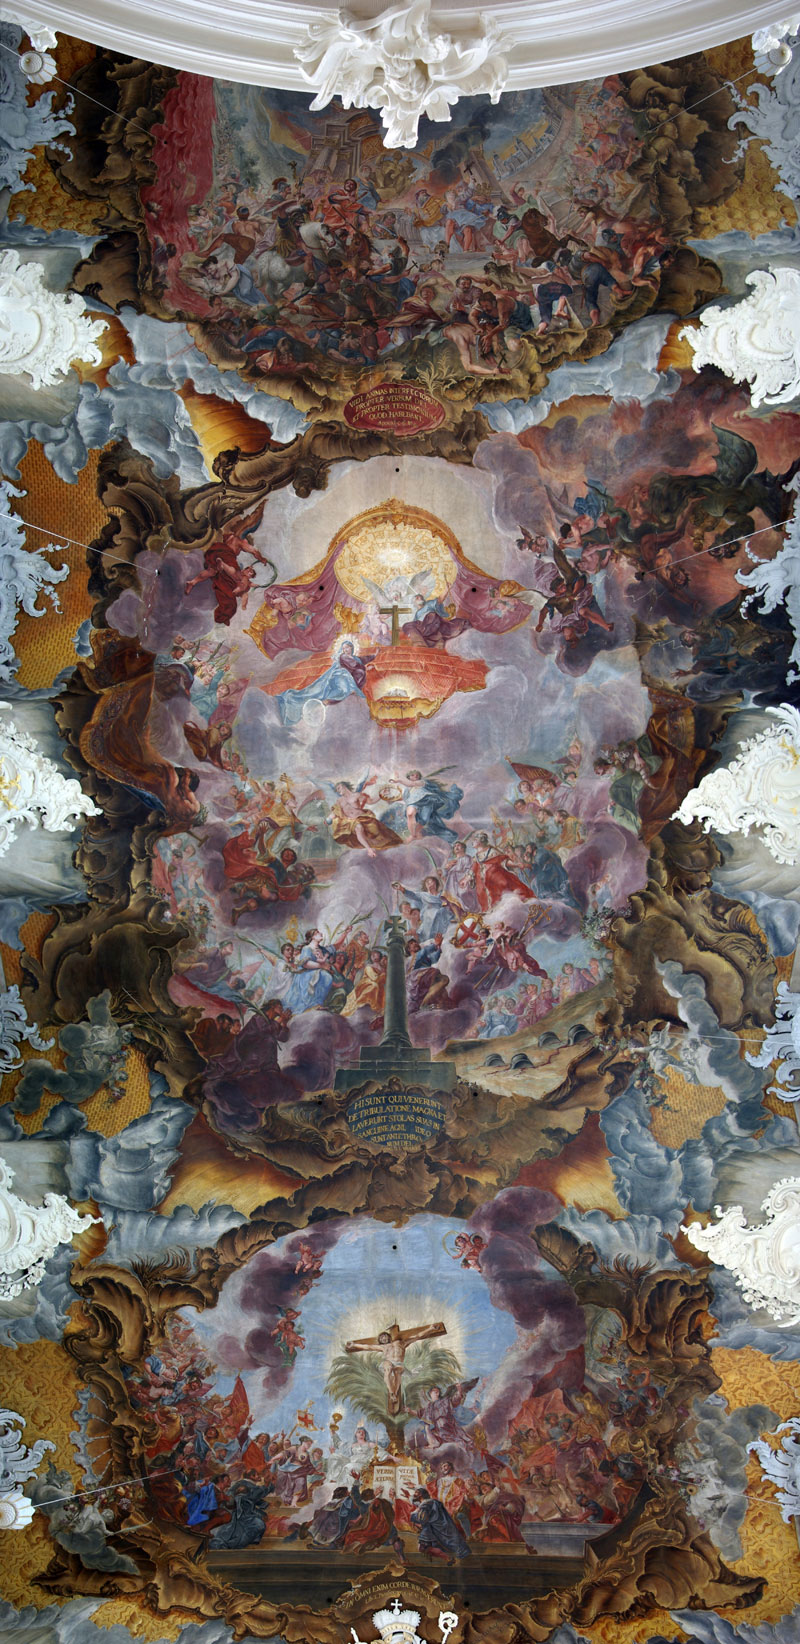 life of st paulinus fresco by christoph thomas scheffler trier germany Picture of the Day: Unreal Ceiling Fresco in Germany